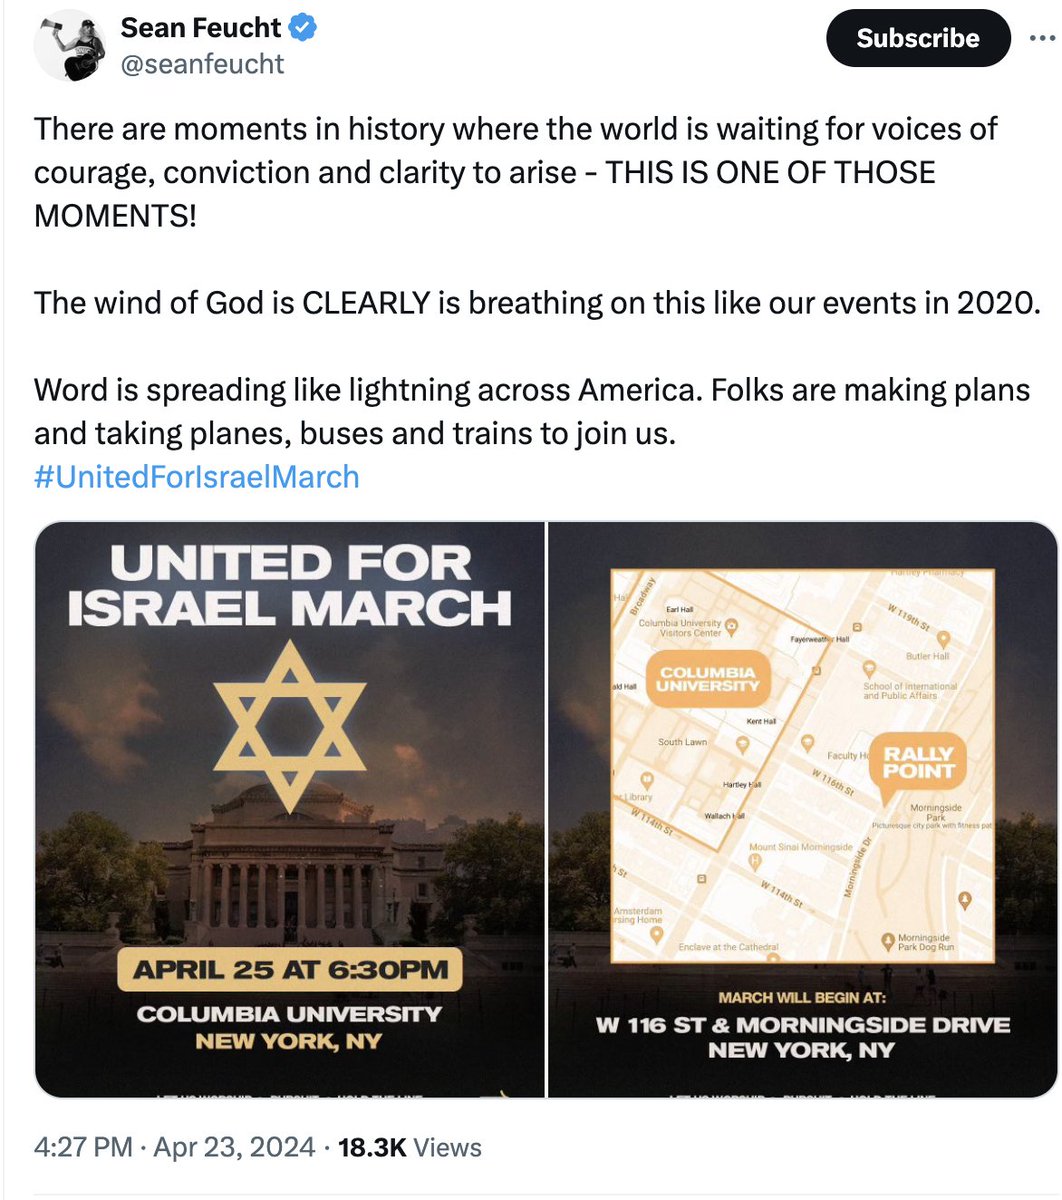 With McInnes showing up yesterday and now Feucht (a prominent Christian nationalist with close links to far-right extremists) talking about people 'taking planes, buses and trains' to his pro-Israel march at #ColumbiaUniversity today, it's definitely something to pay attention to